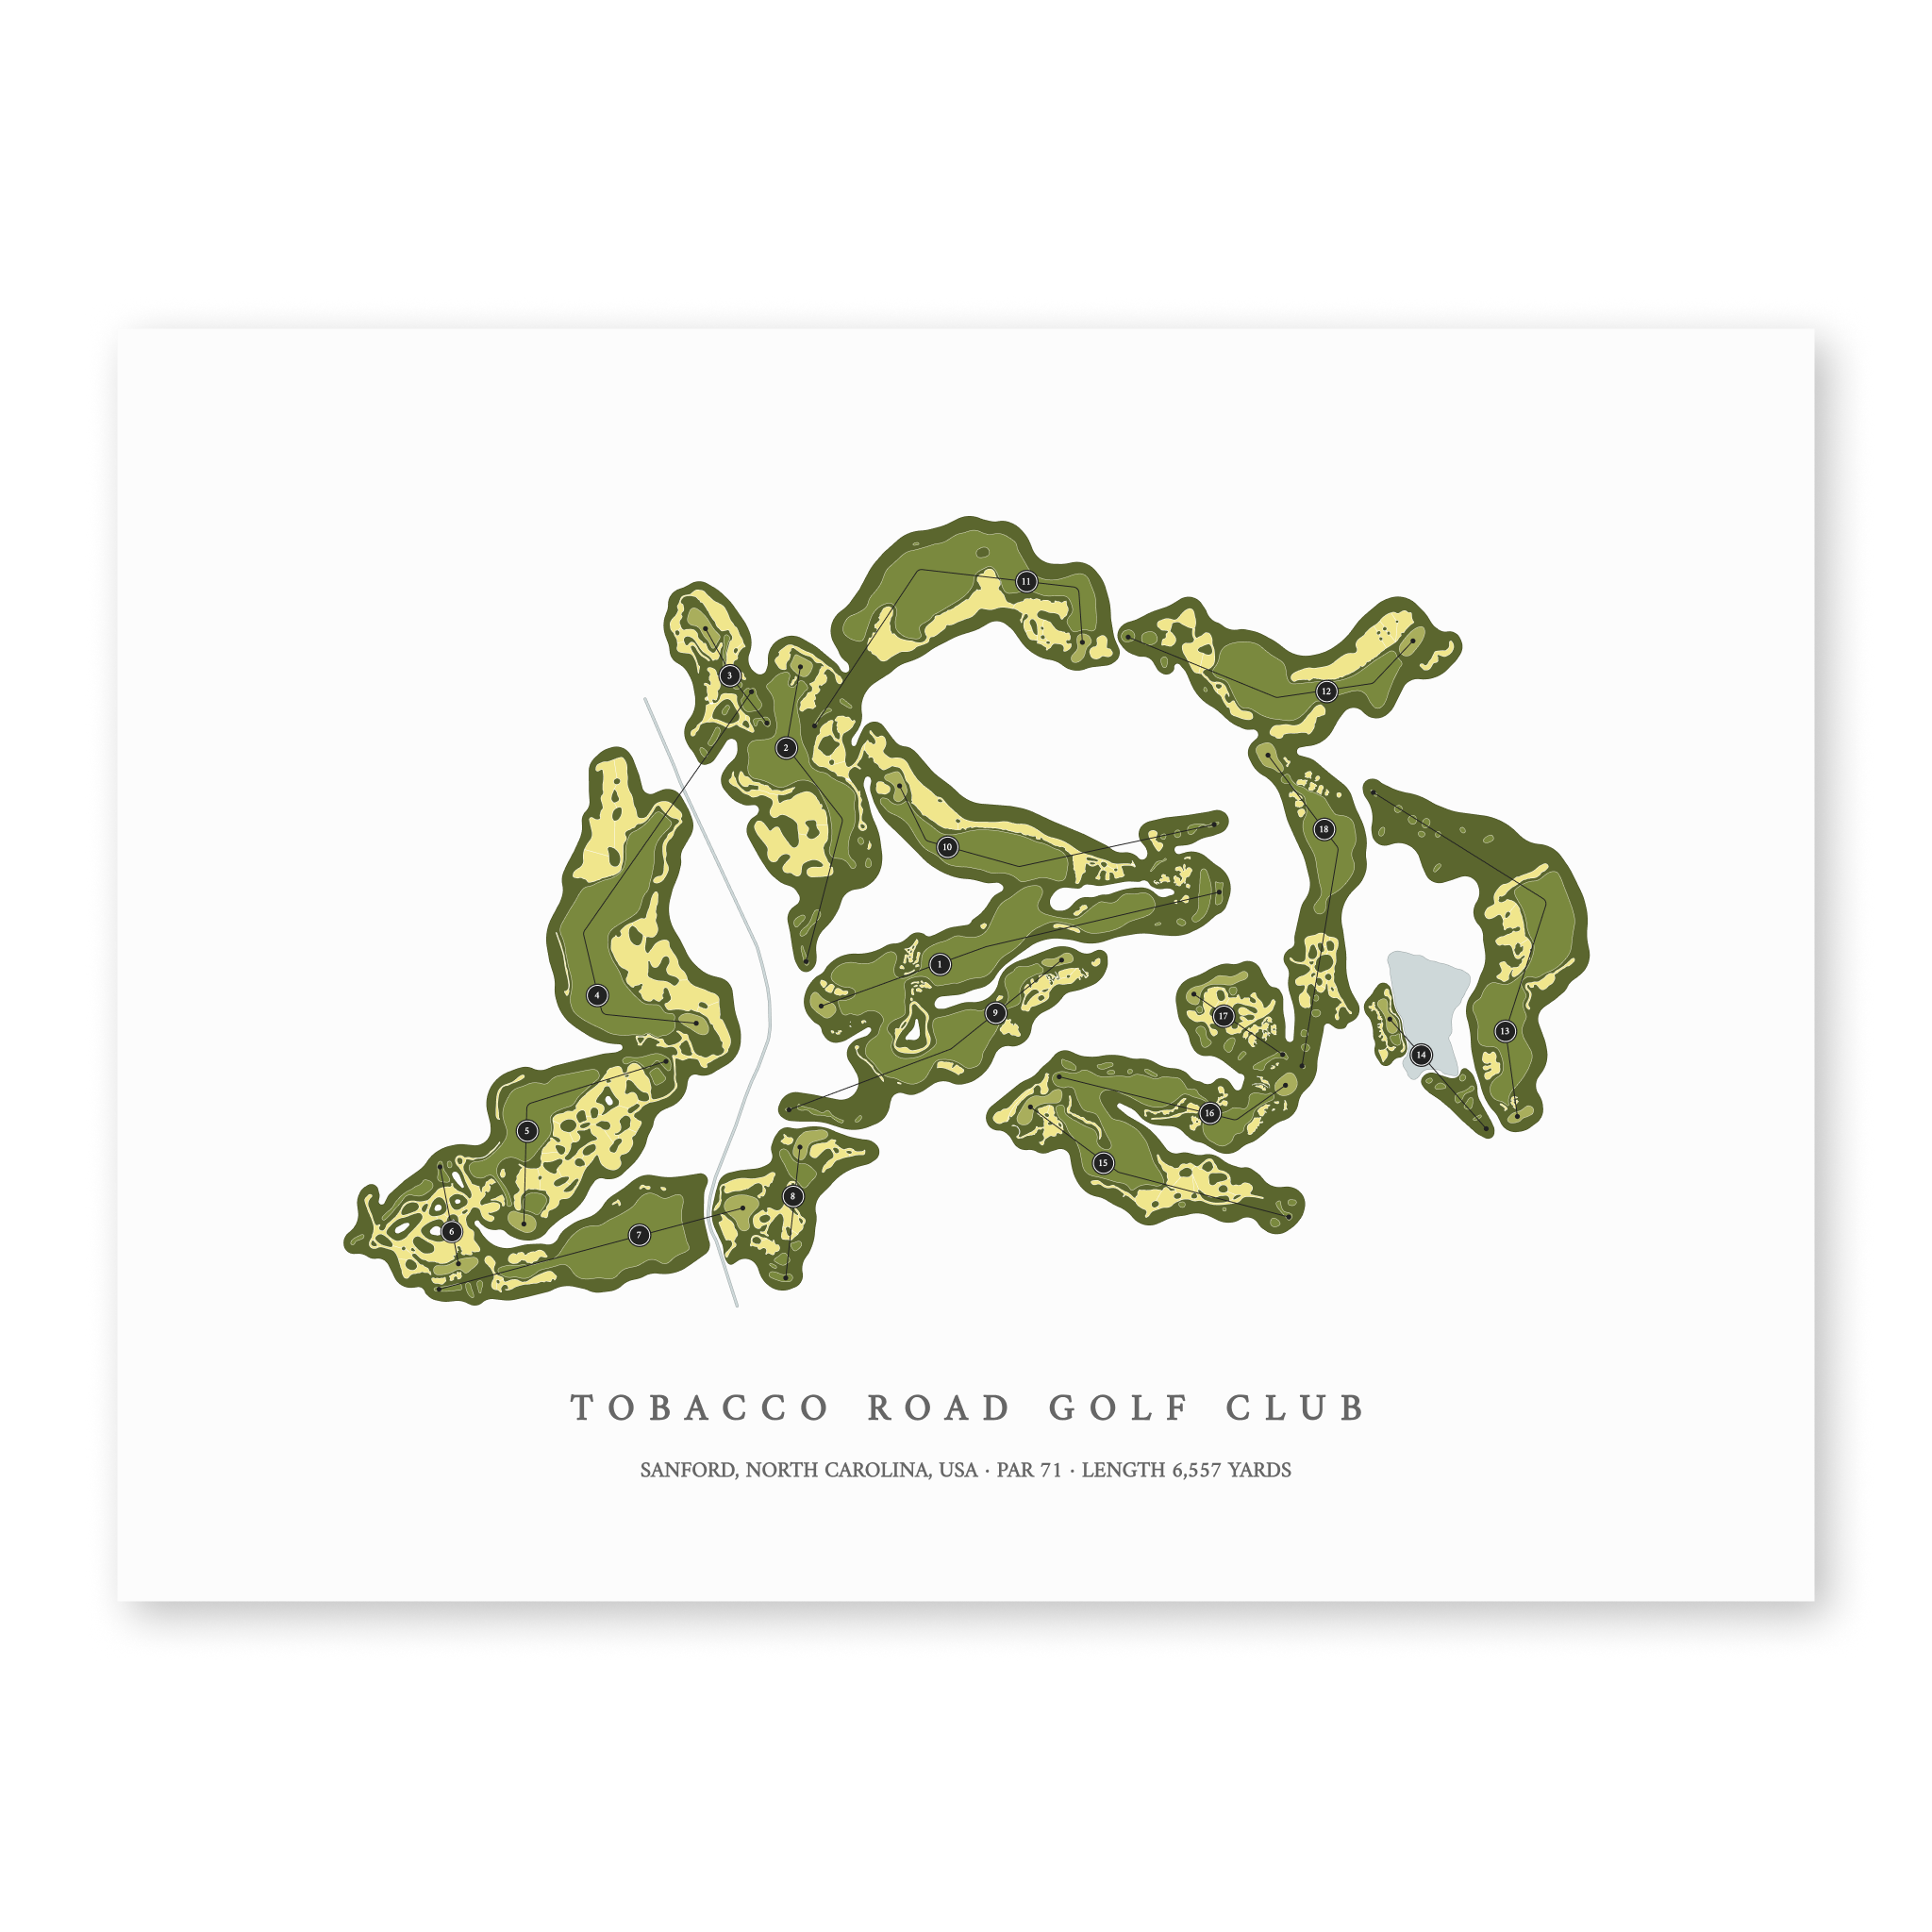 Tobacco Road Golf Club| Golf Course Print | Unframed With Hole Numbers #hole numbers_yes